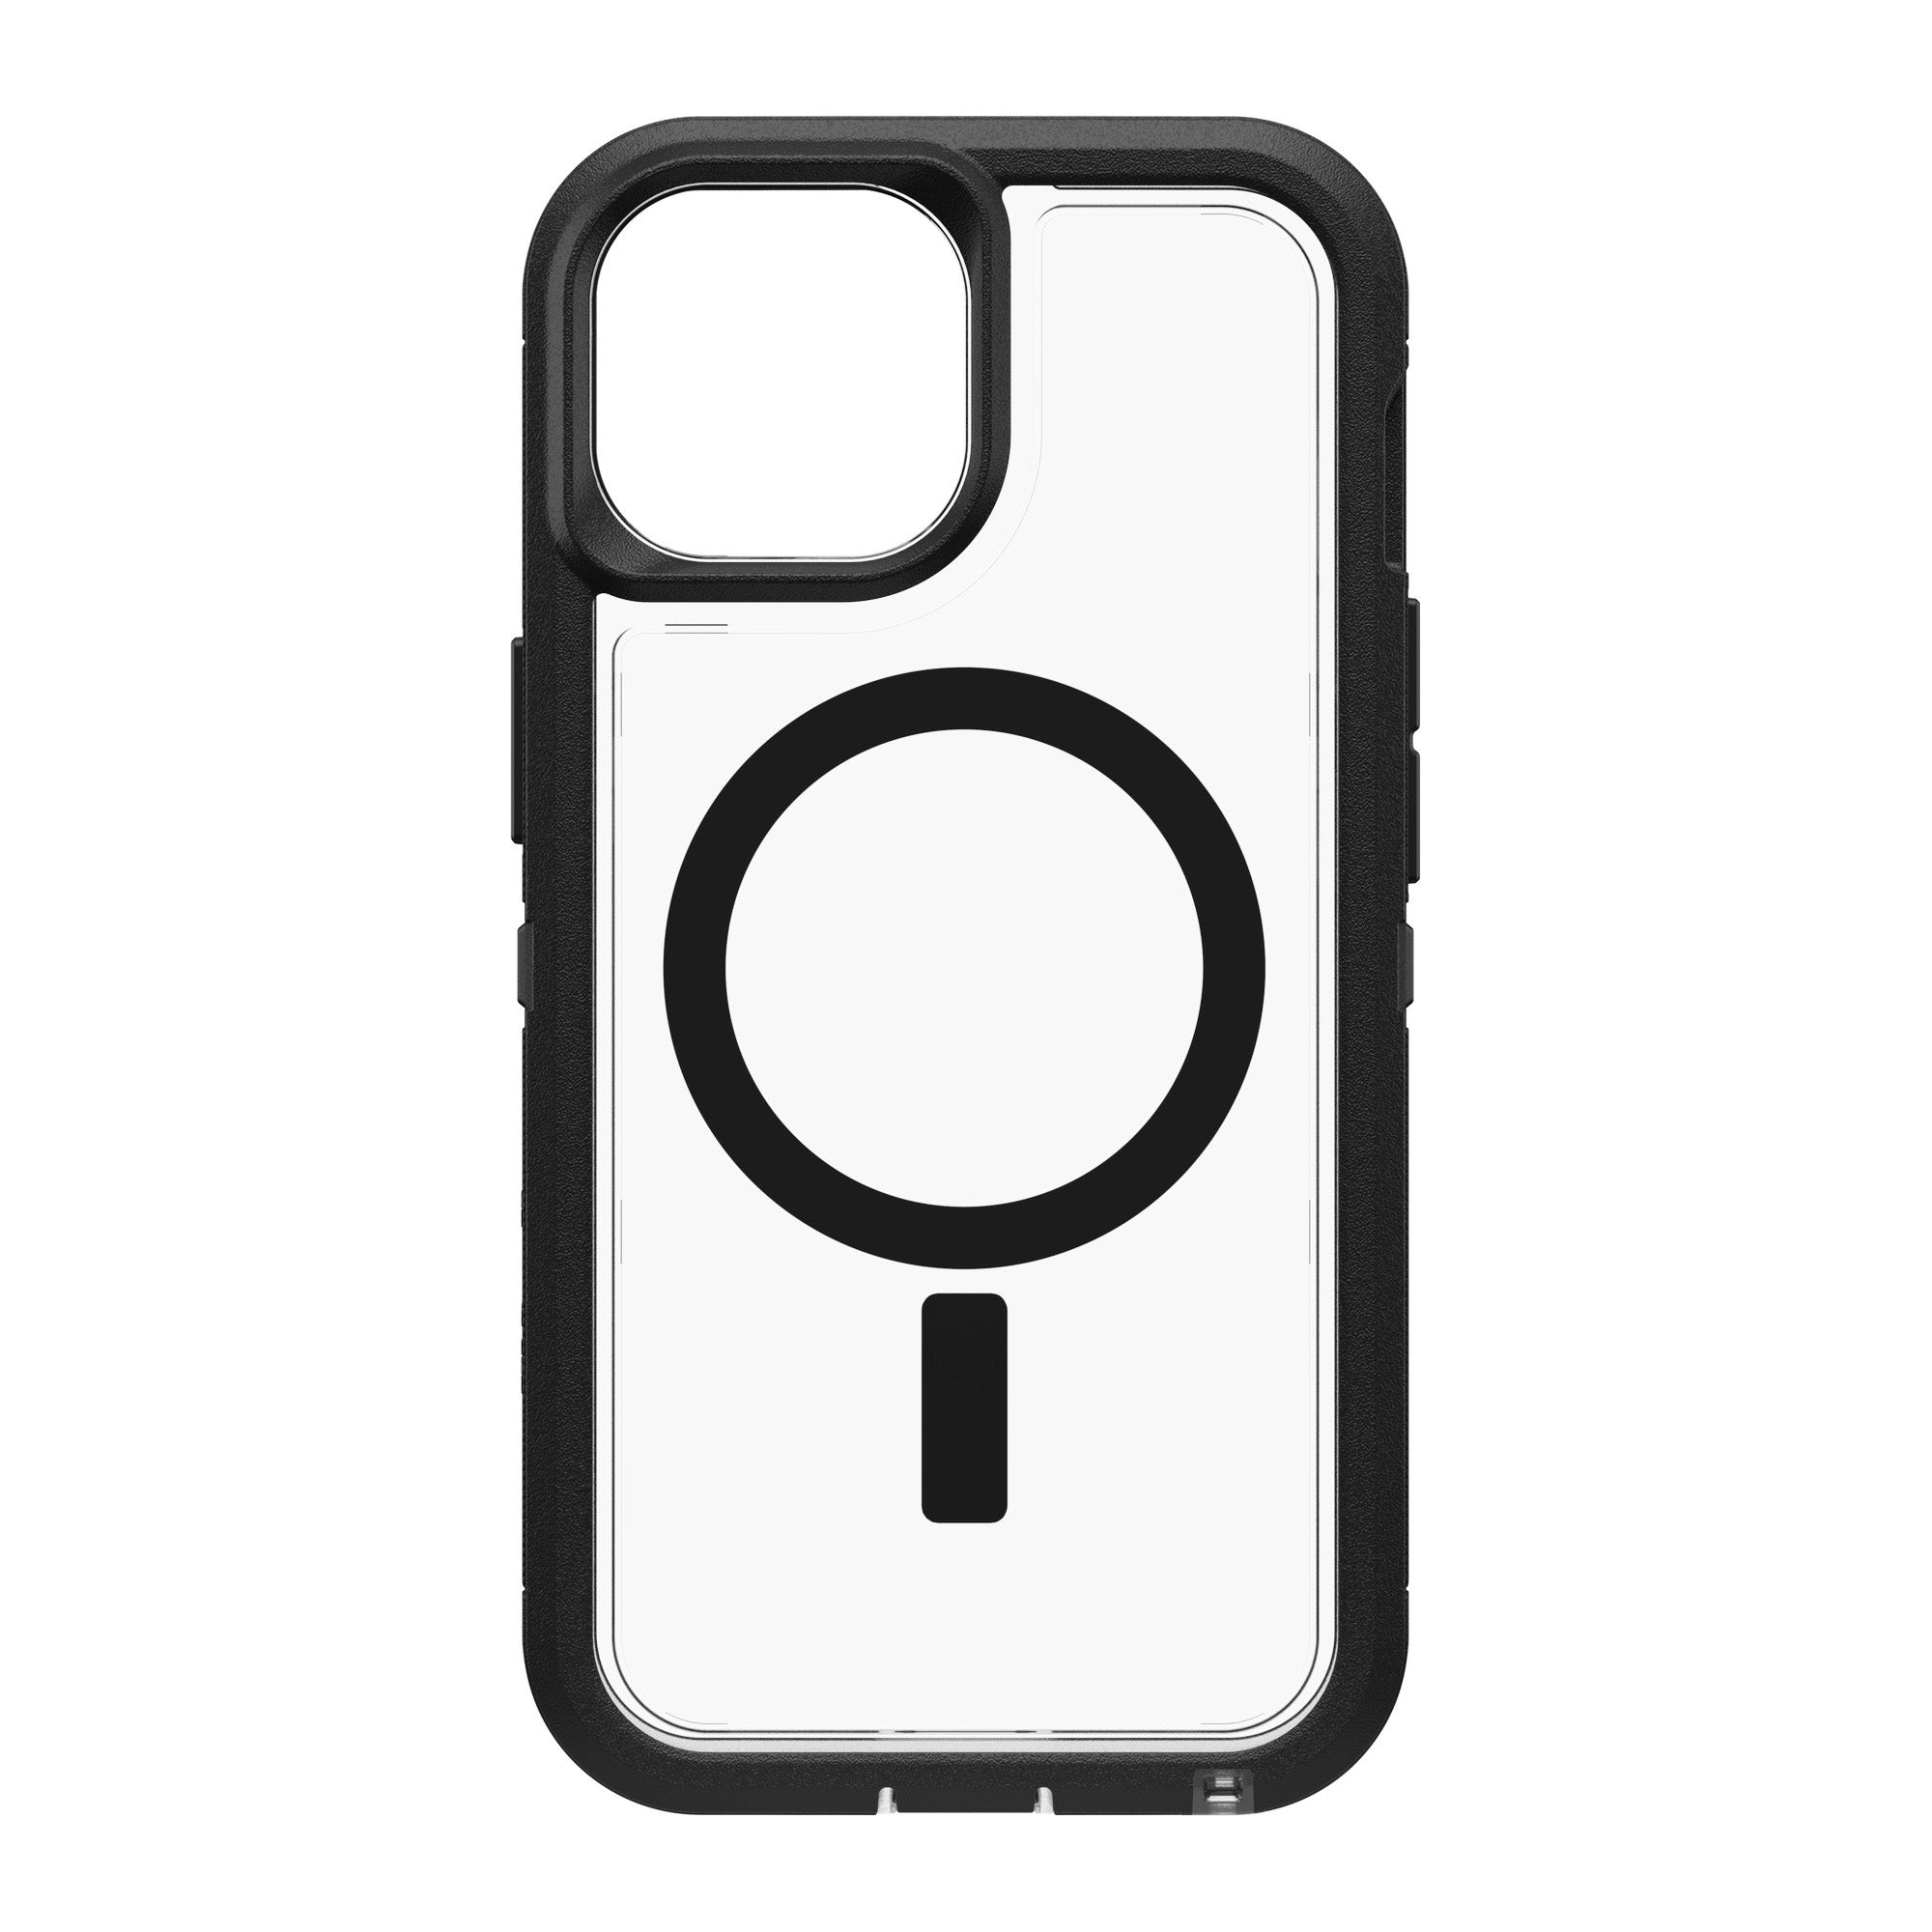 iPhone 15/14/13 Otterbox Defender XT w/ MagSafe Clear Series Case - Clear/Black (Dark Side) - 15-11410